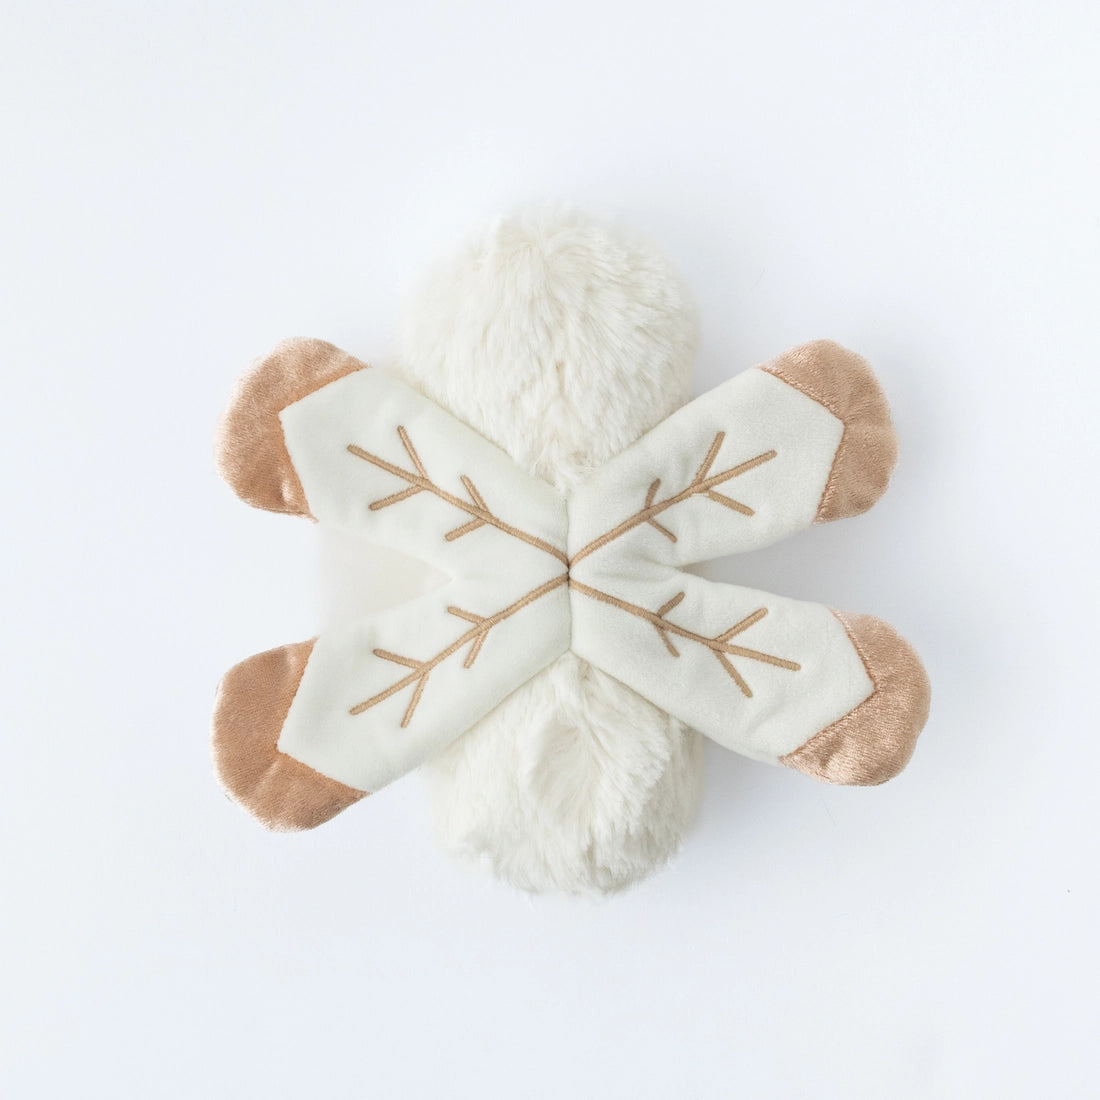 Snowflake Dragonfly mini and Ibex Lesson Book